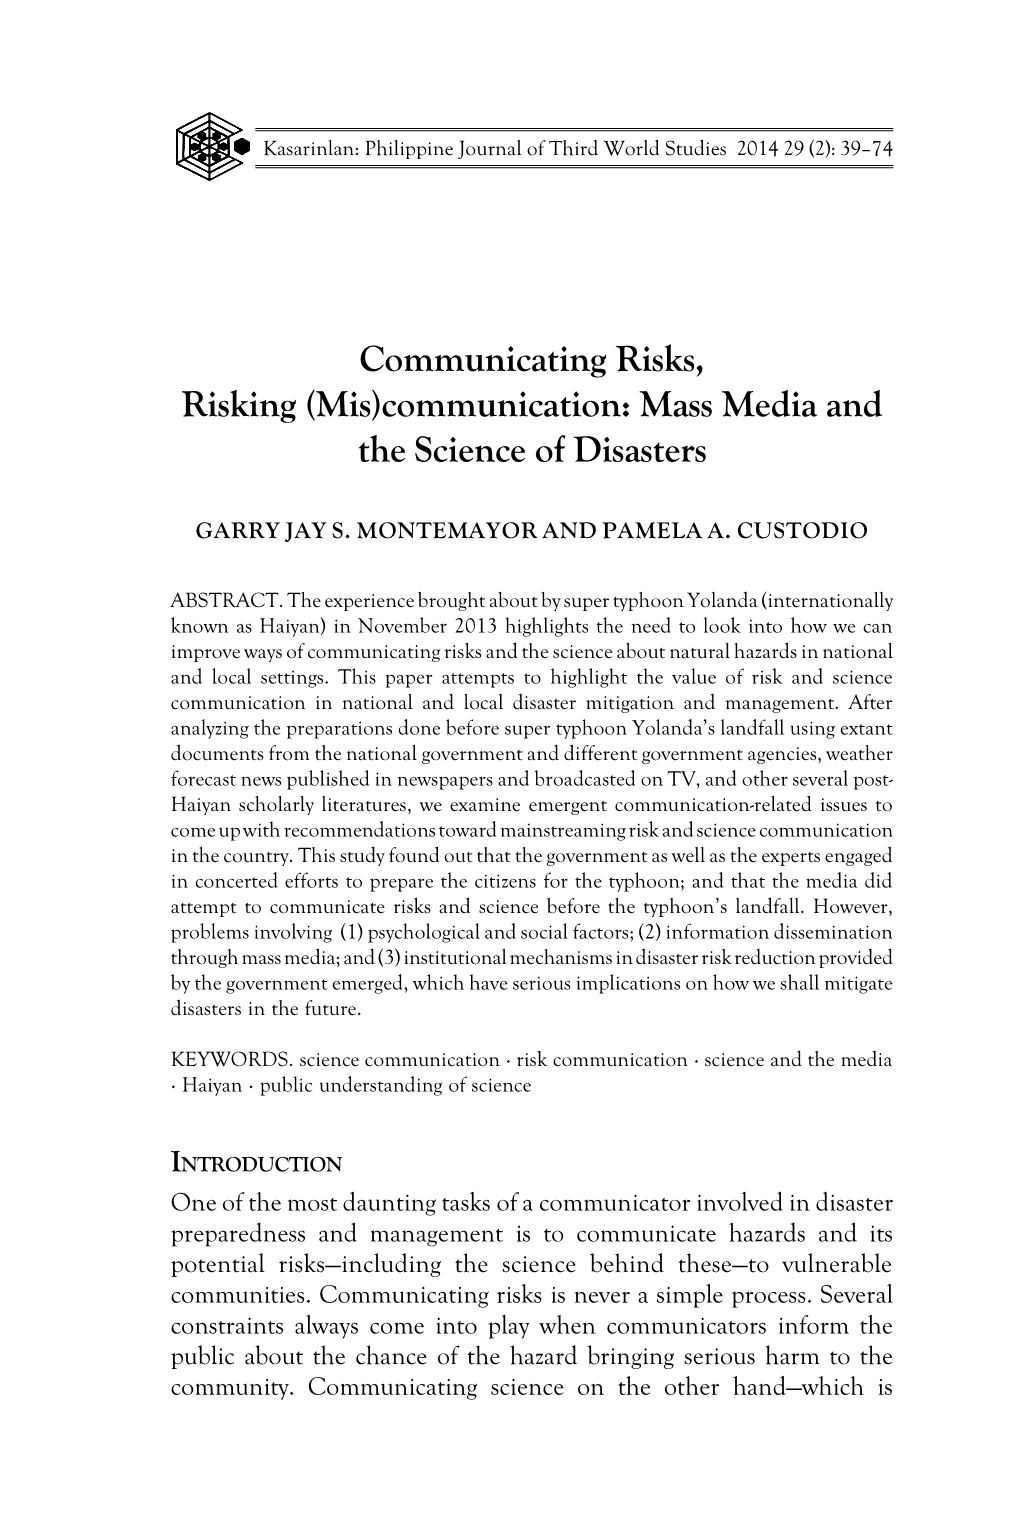 Communication: Mass Media and the Science of Disasters